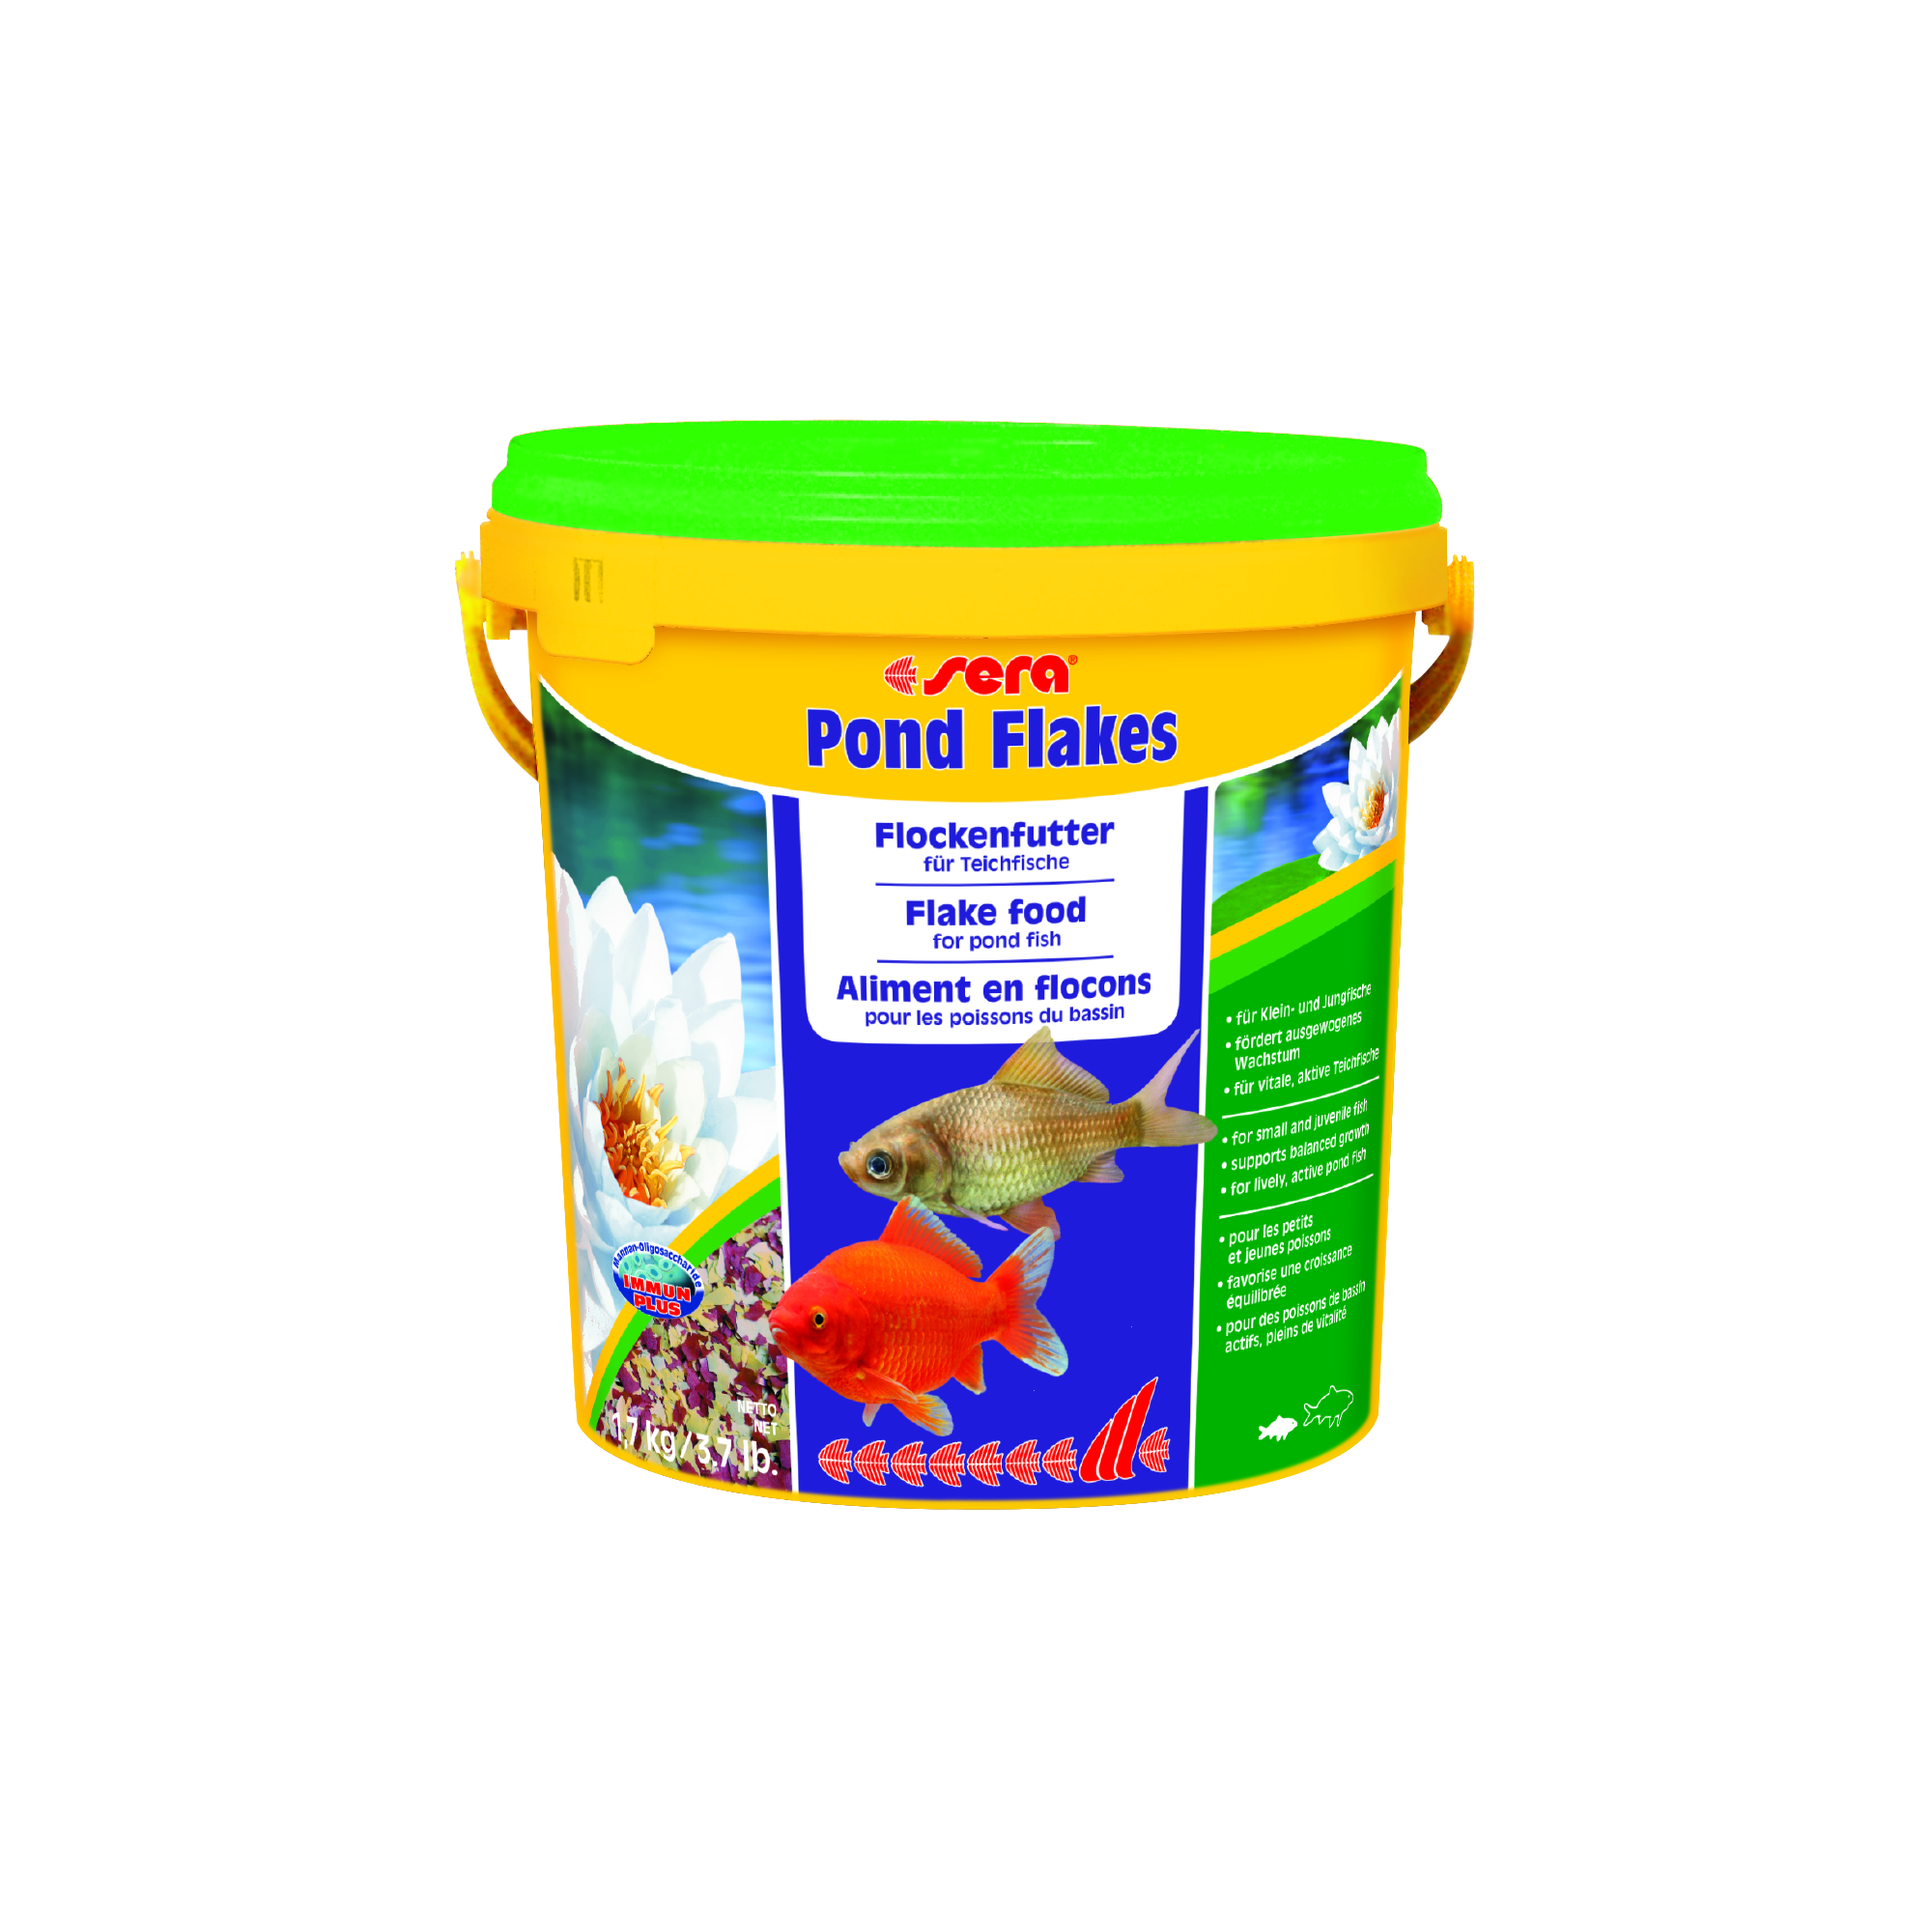 Fischfutter "Pond" Flakes 1.7 kg + product picture